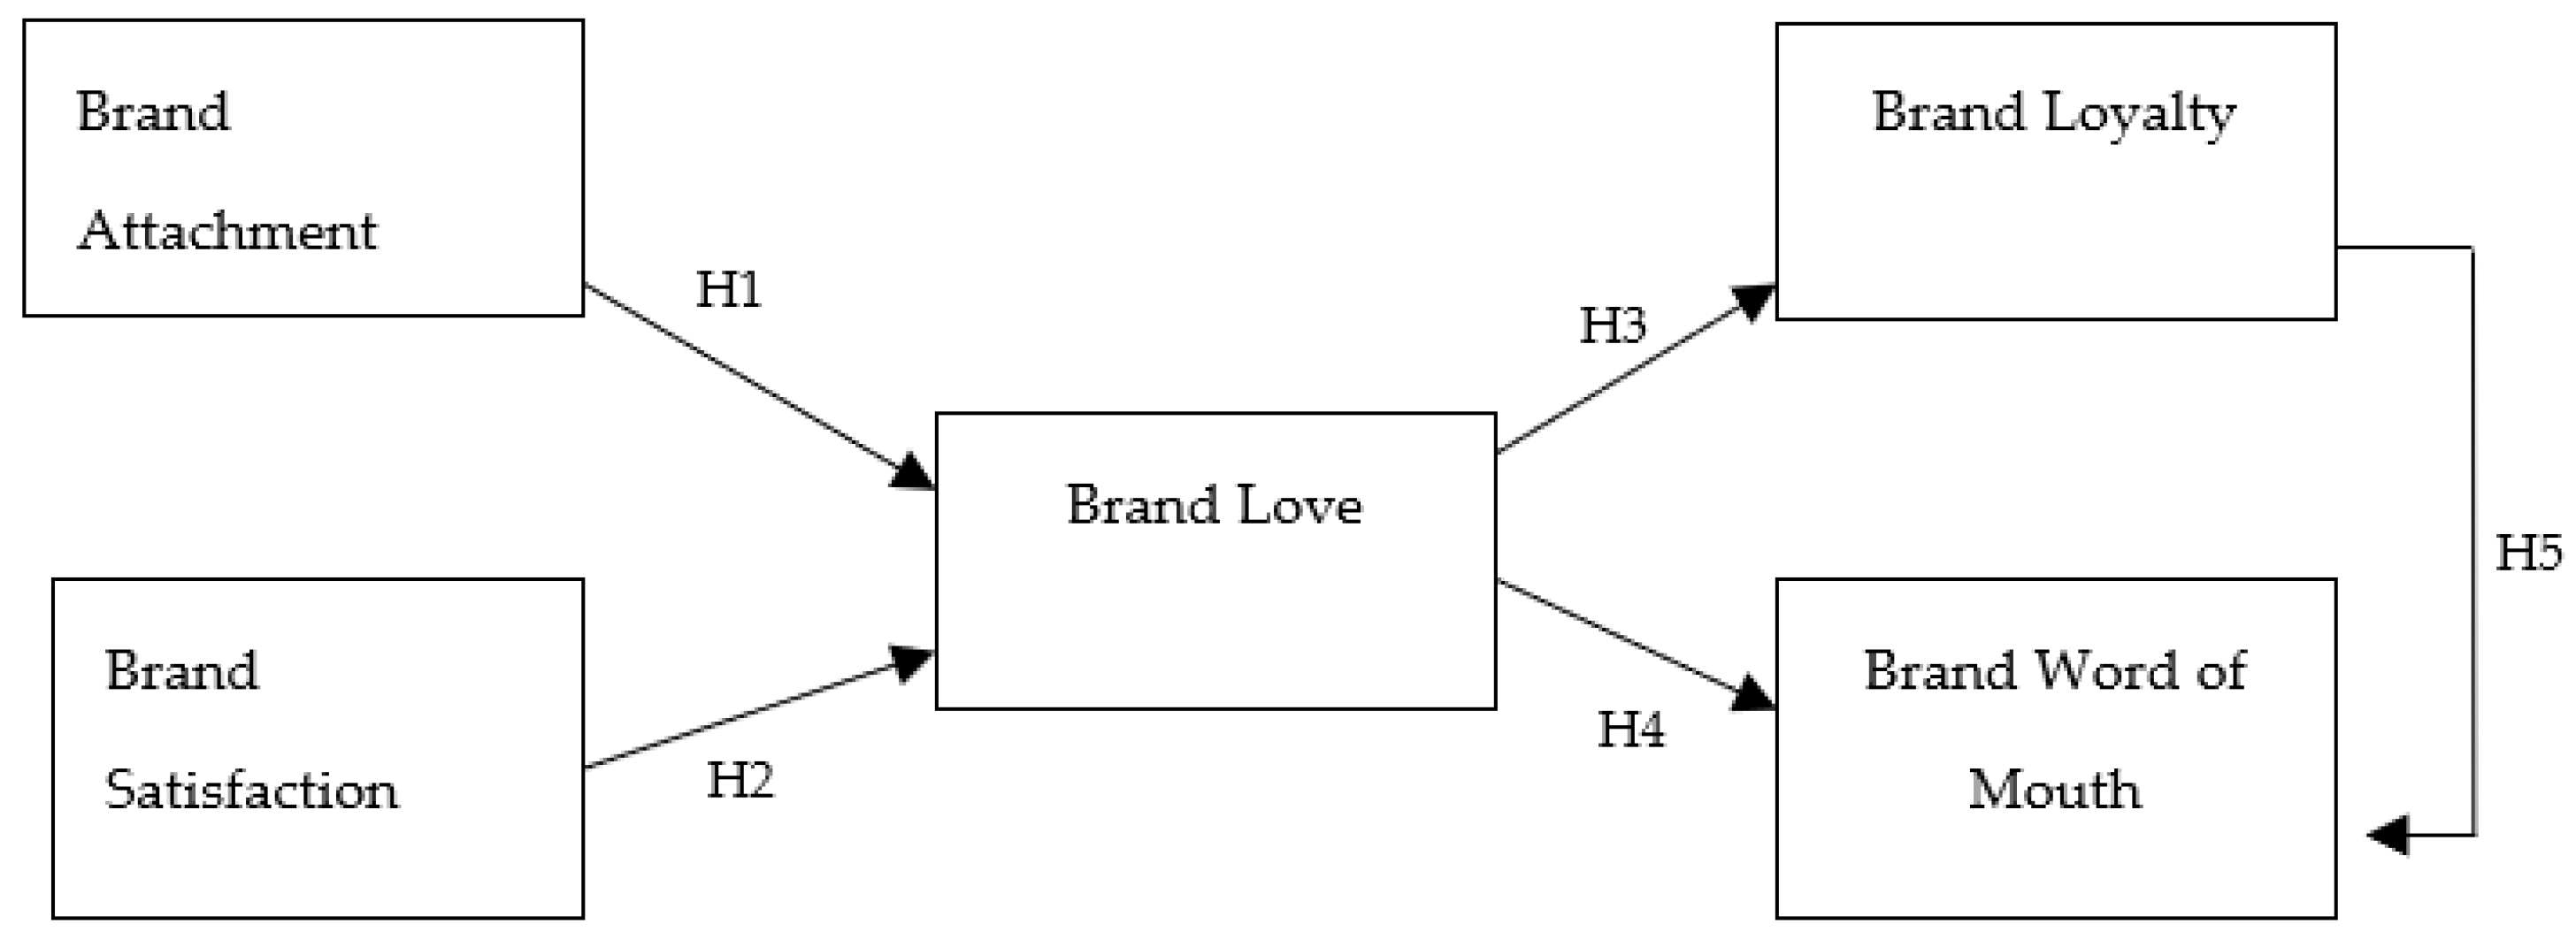 A lovable personality: The effect of brand personality on brand love